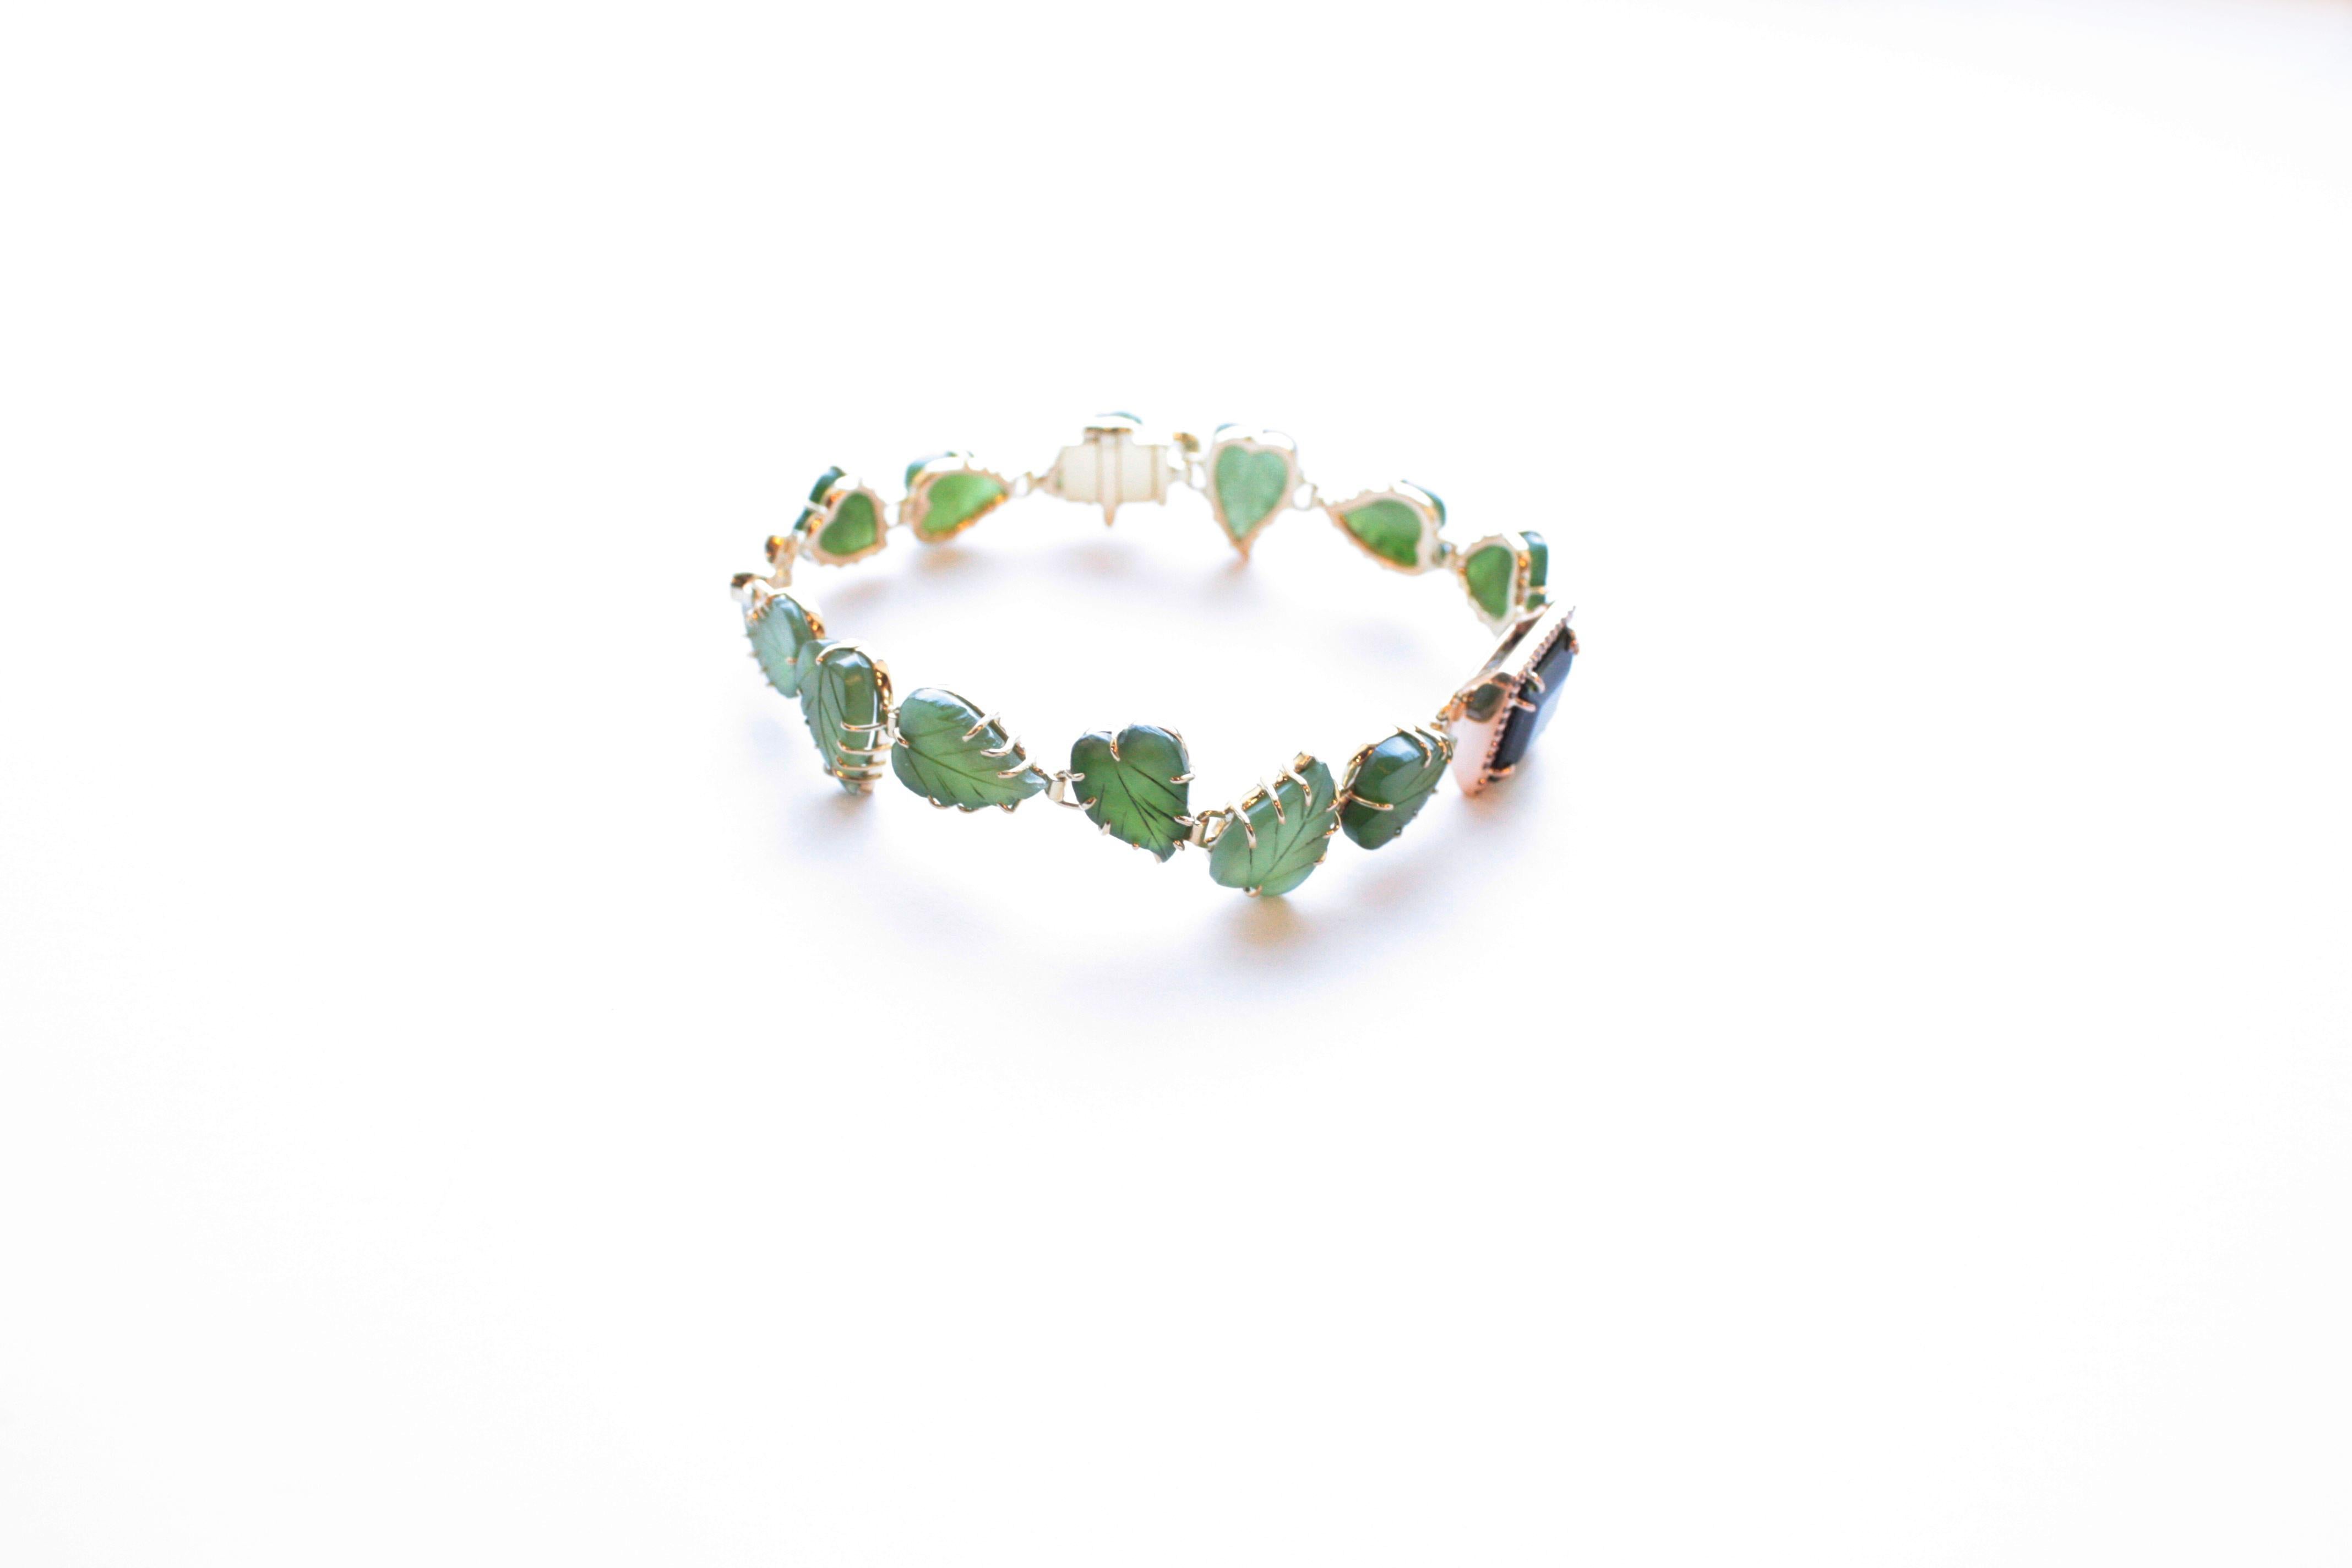 Pomme Bracelet
A thin delicate bracelet fashioned primarily of carved jade leaves.  The distinctive opaque green of the jade is offset by a vividly translucent green tourmaline rimmed with white diamonds in eighteen karat yellow gold at one end, and